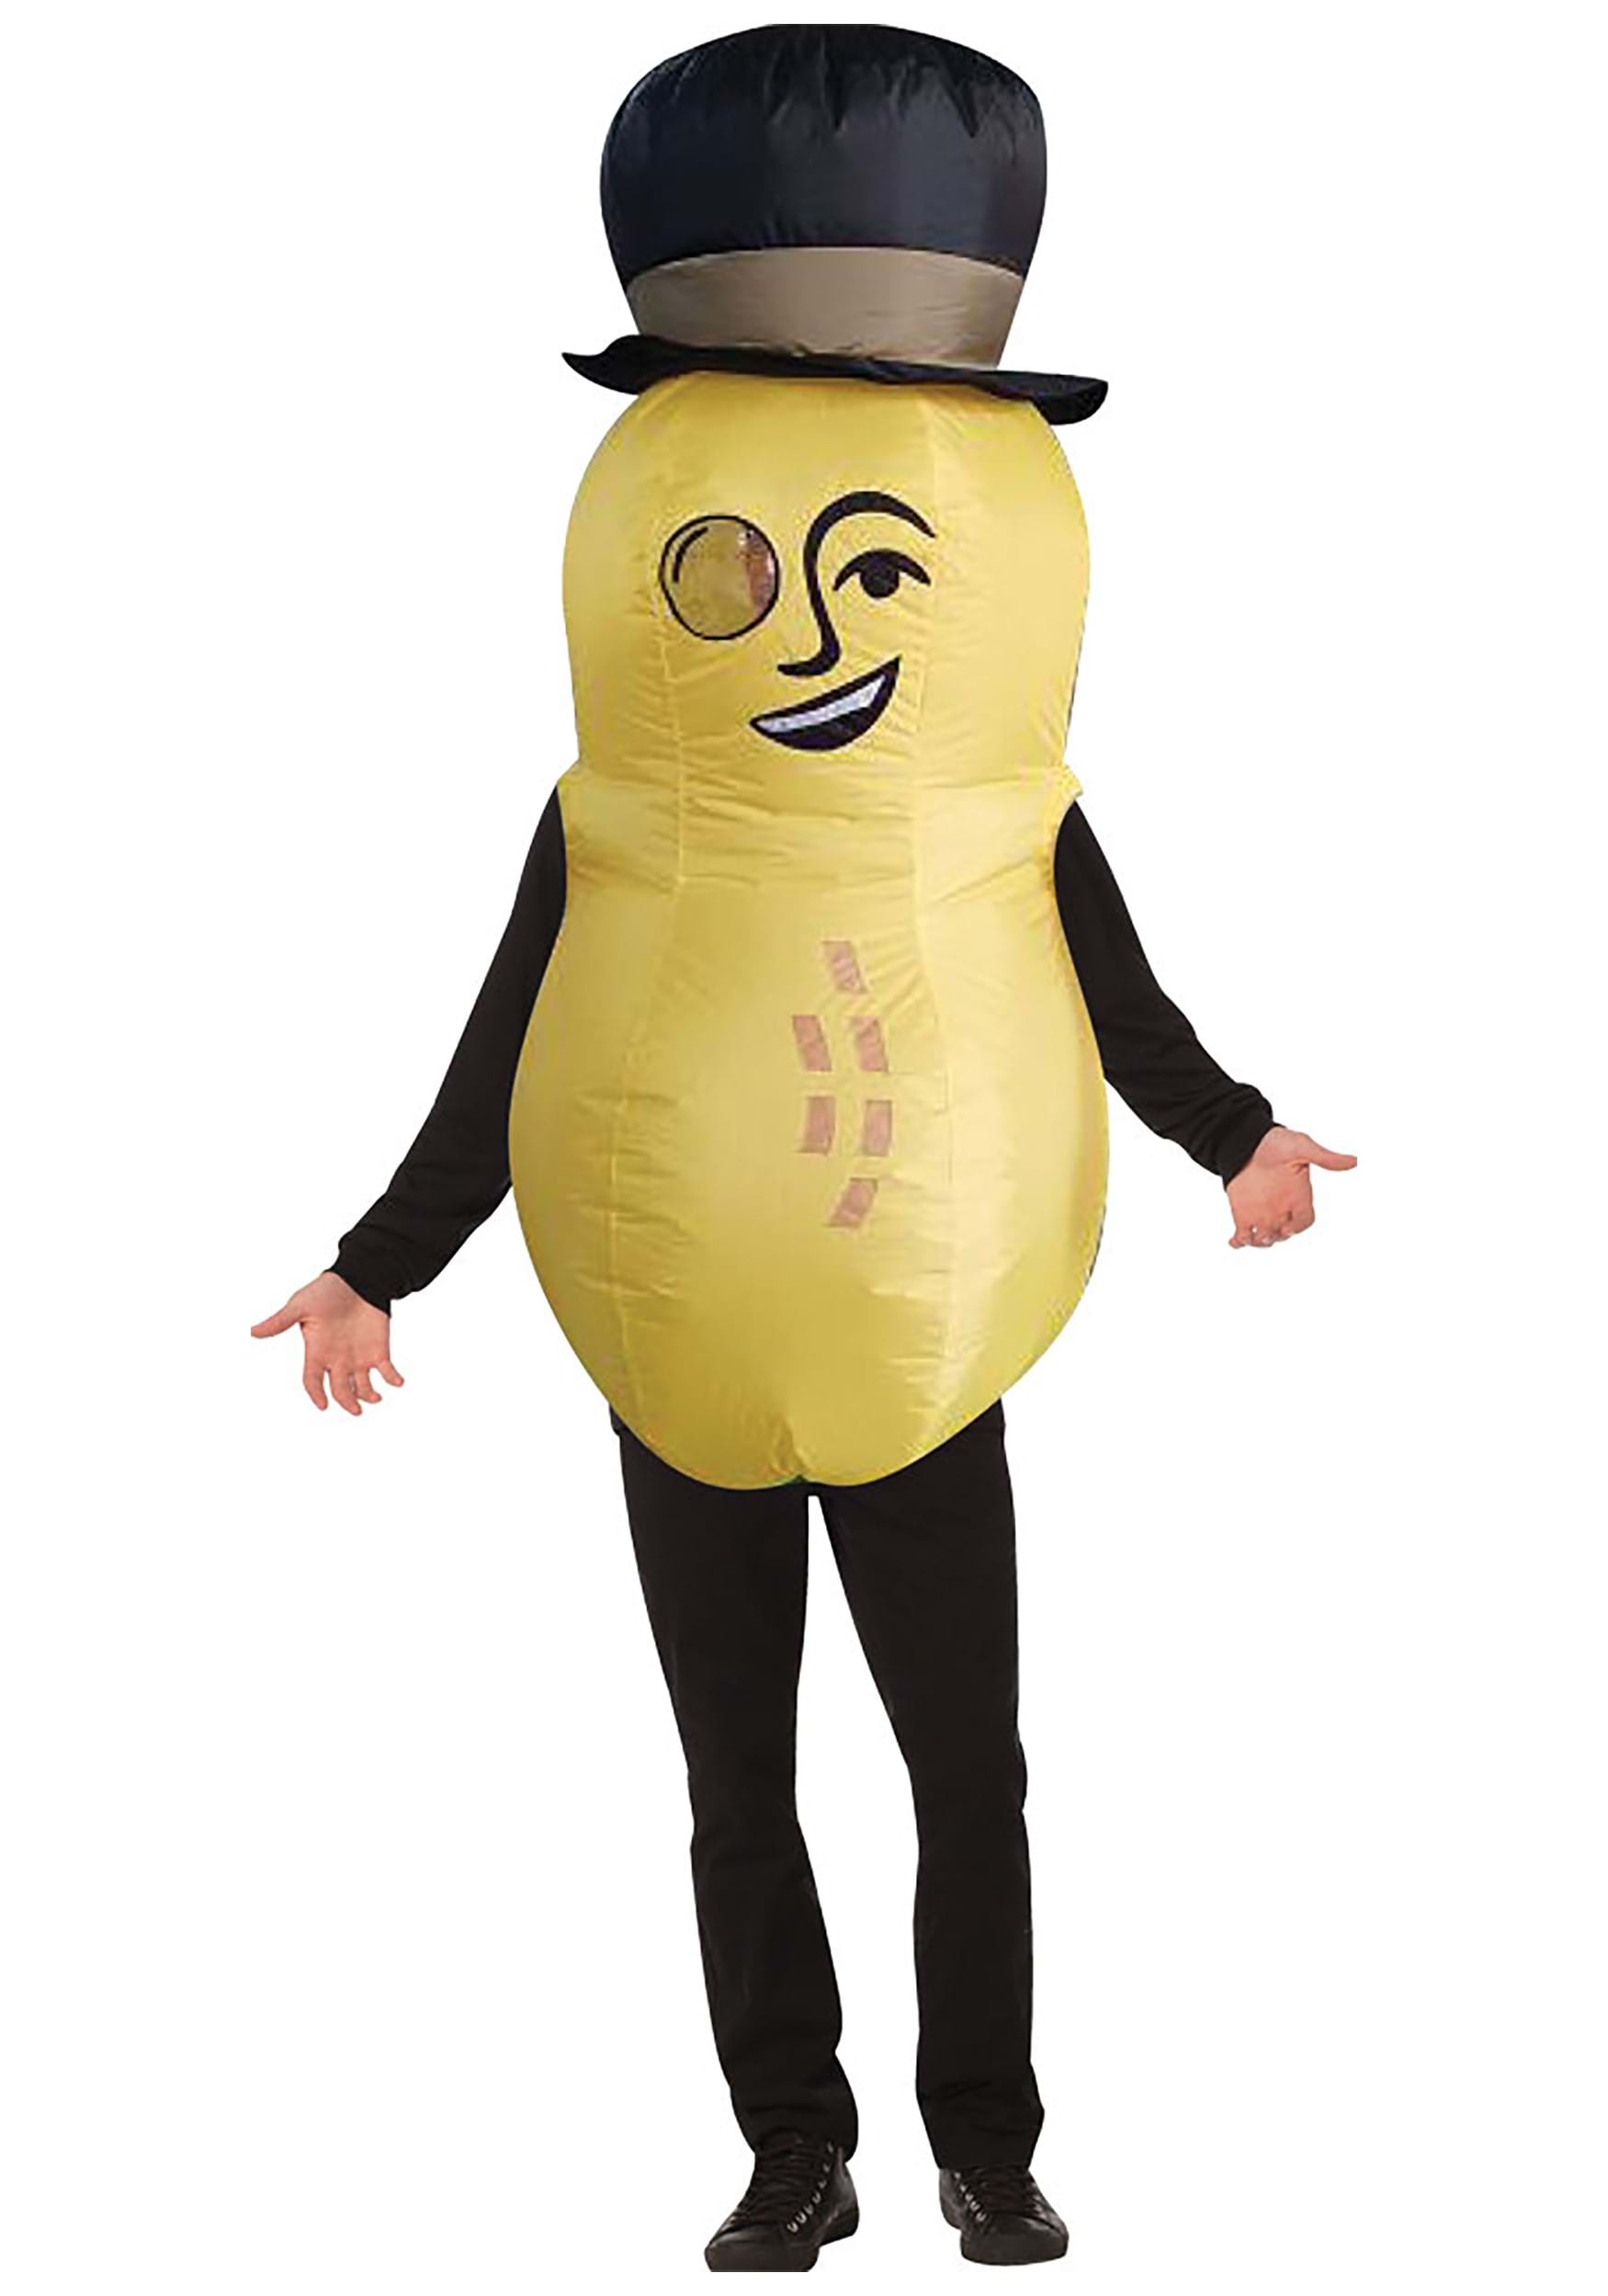 https://images.halloween.com/products/72969/1-1/mr-peanut-inflatable-costume.jpg